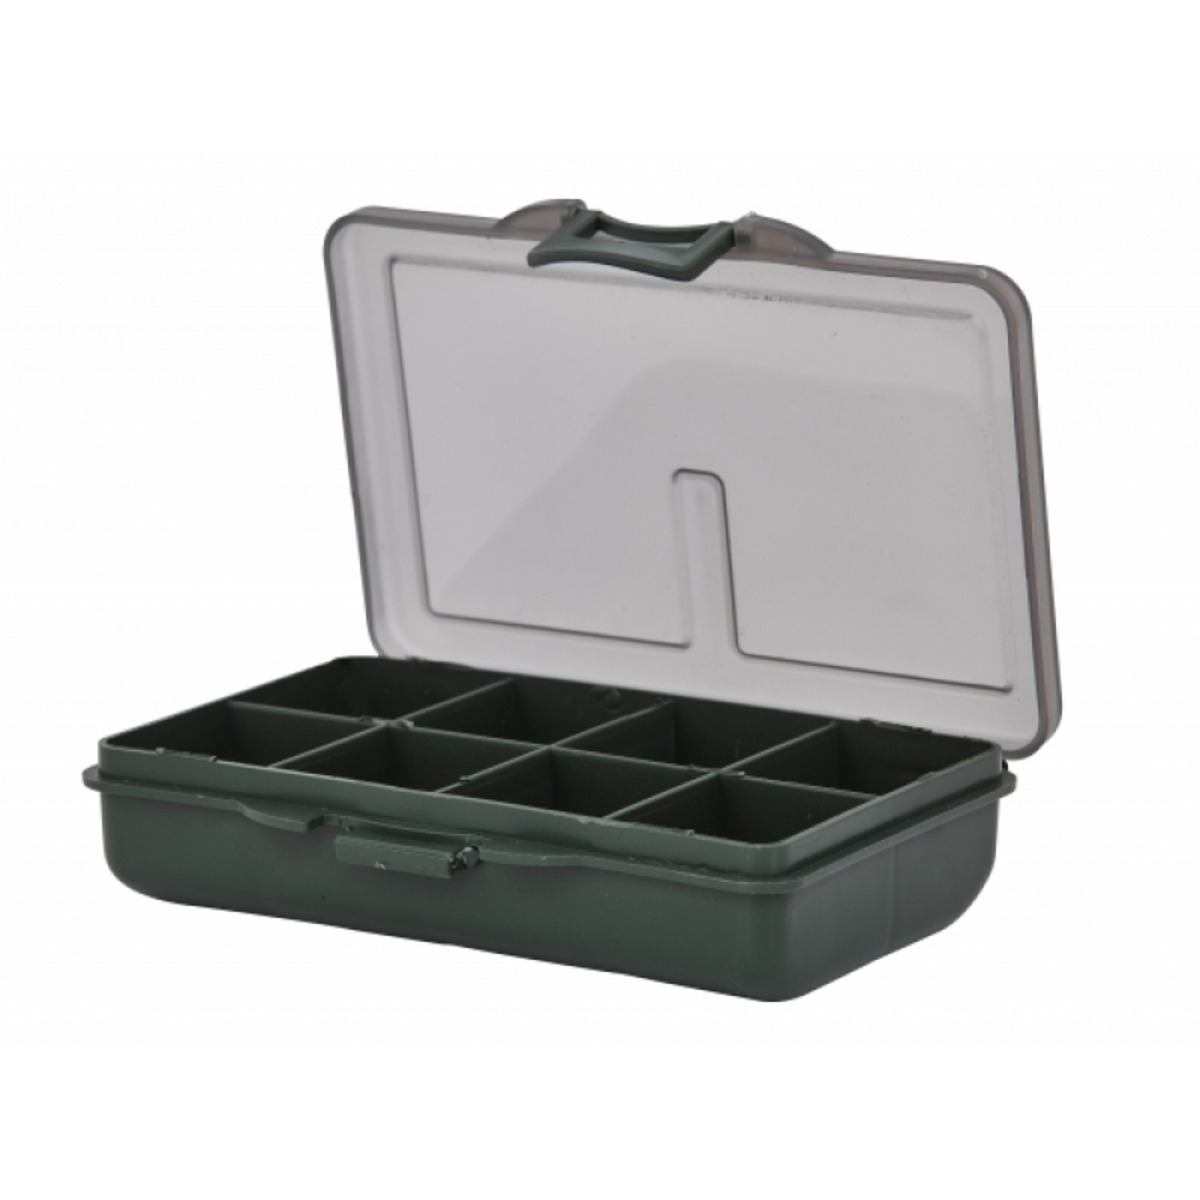 Starbaits Session Small Box - 8 Compartments         